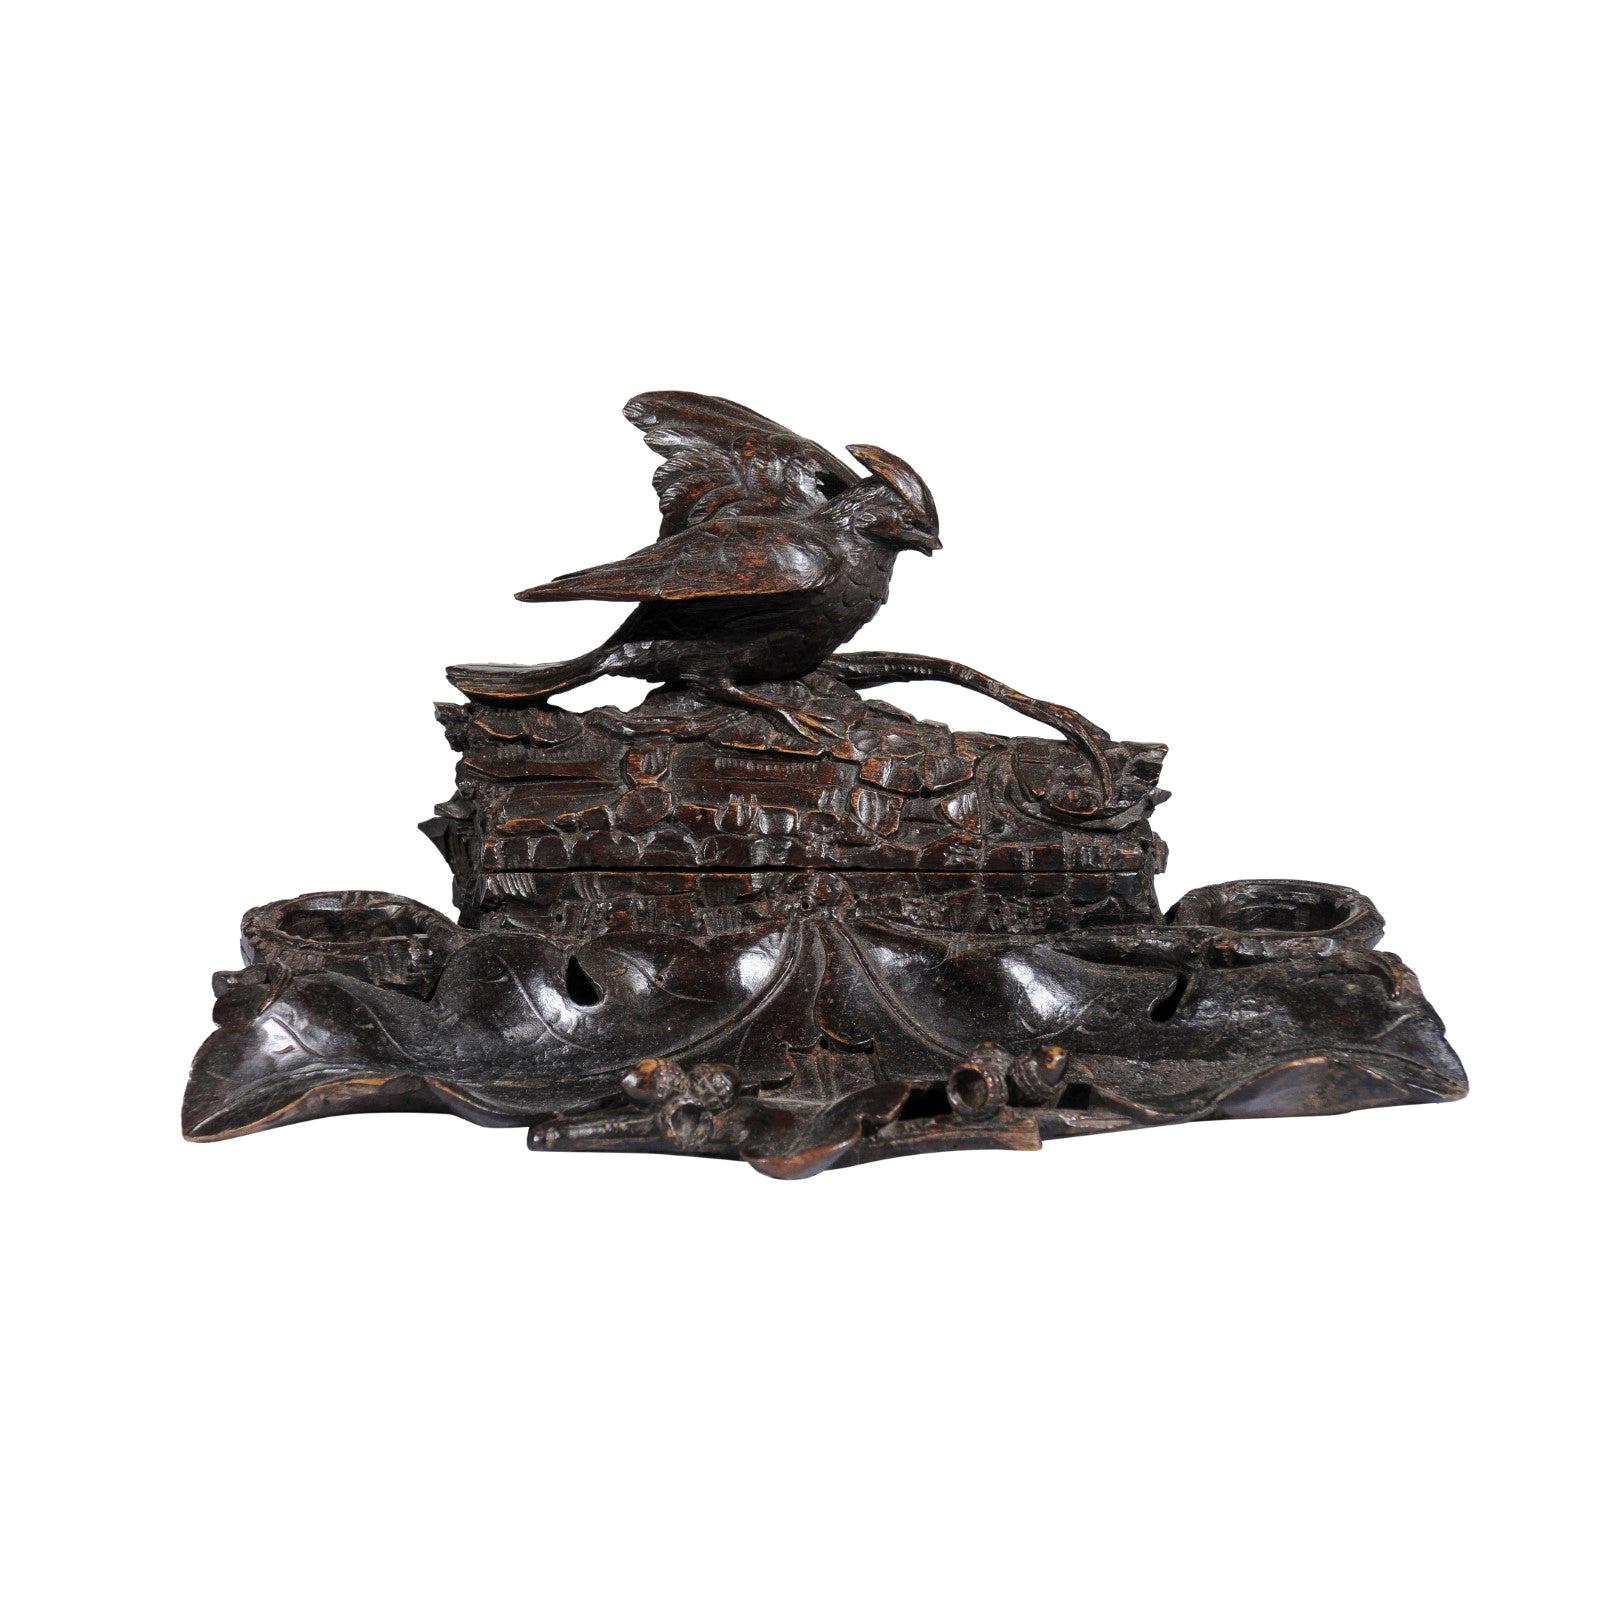 19th Century Black Forest Carved Wooden Inkwell with Bird, Acorns and Oak Leaves